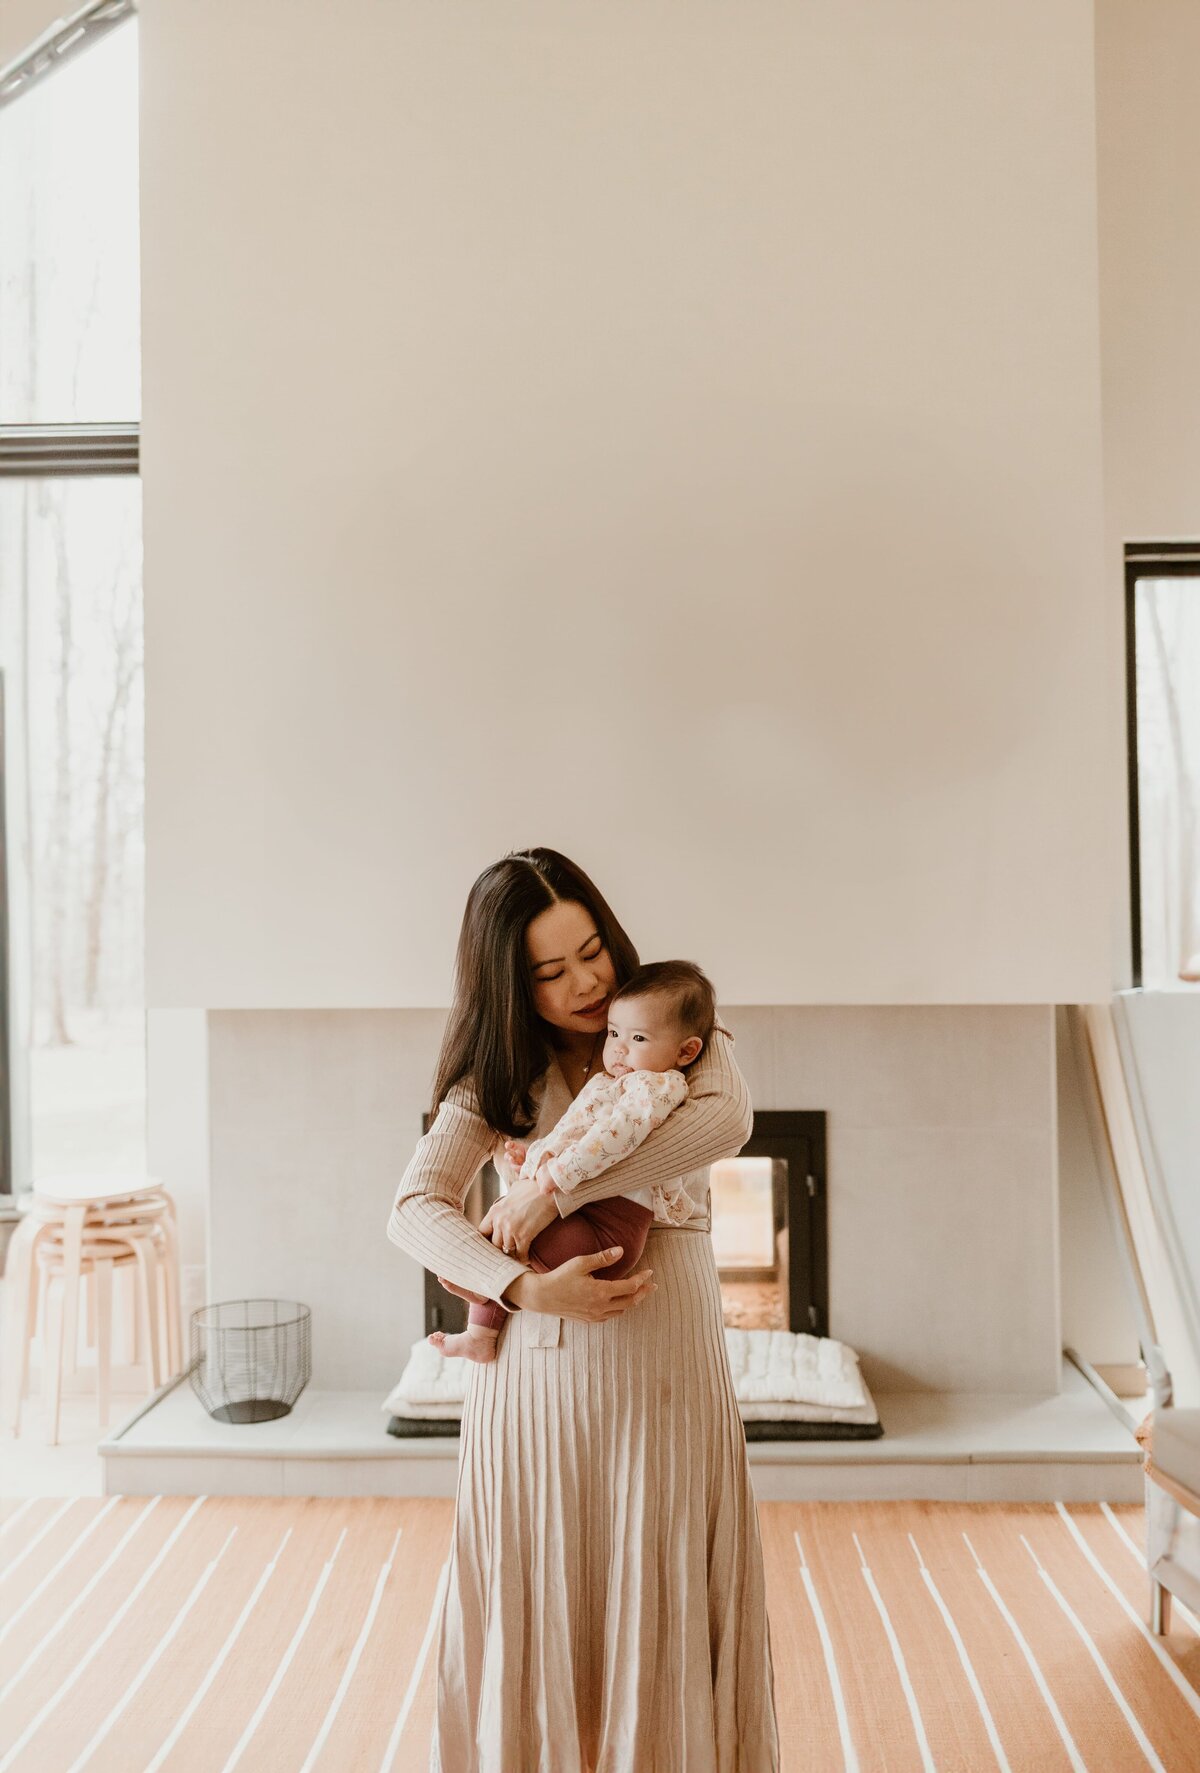 A mother lovingly cradles her baby in a modern living room with large windows, a fireplace, and chic minimalist decor.